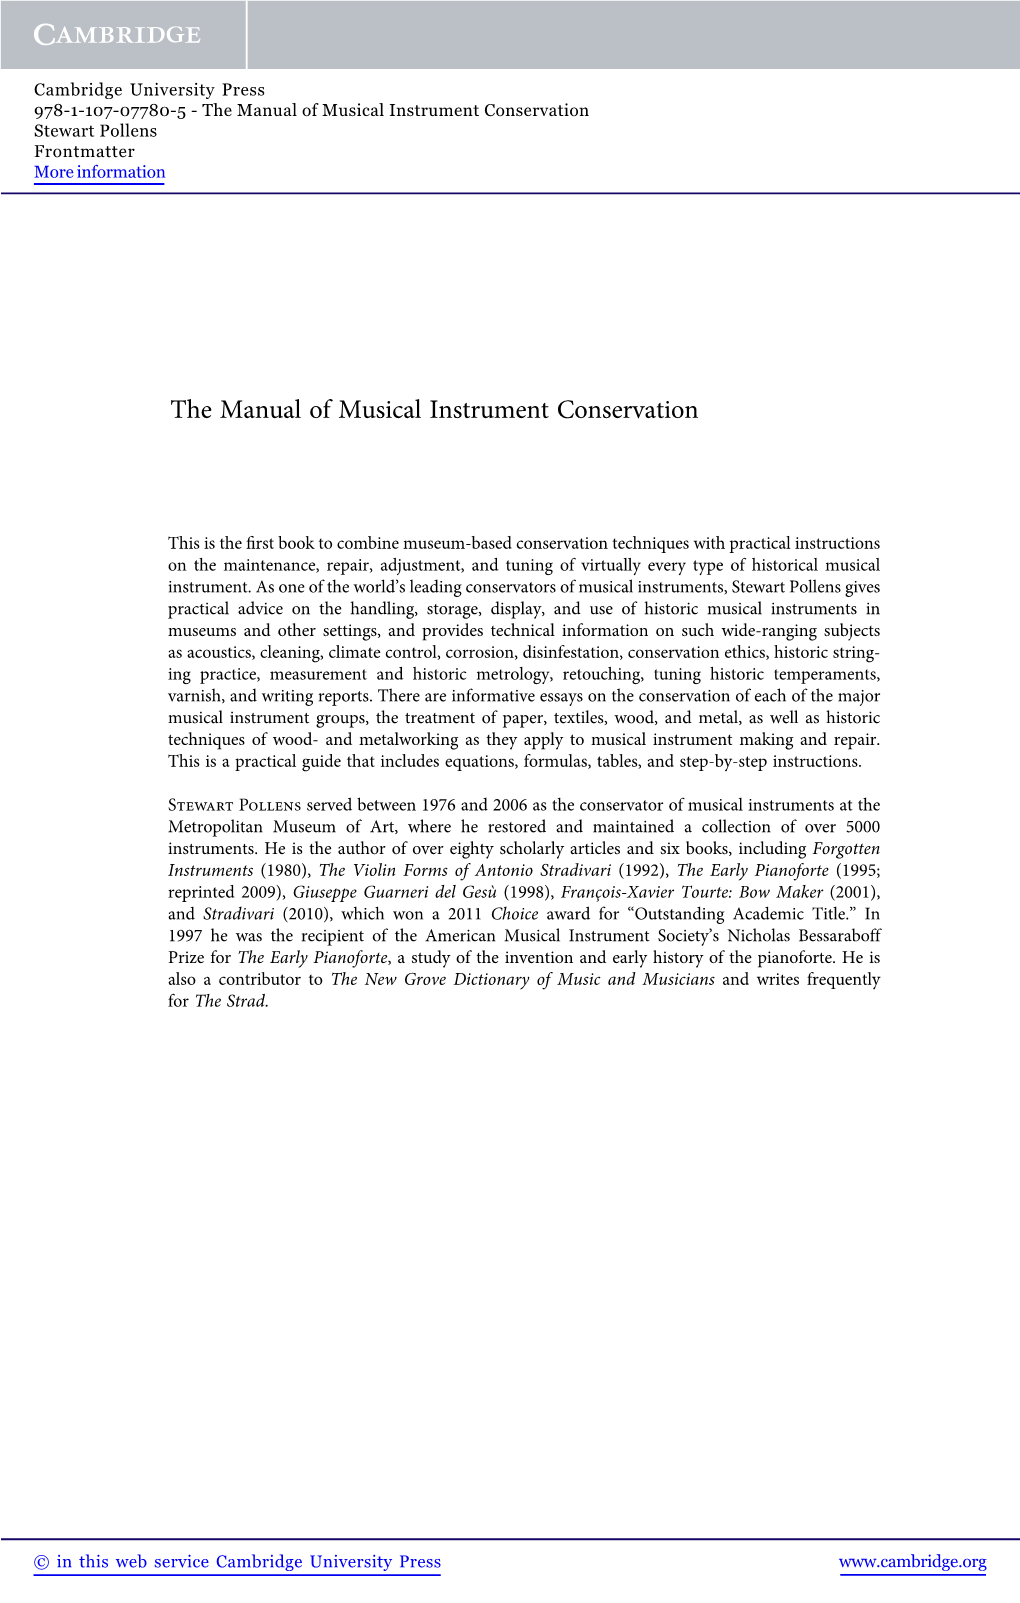 The Manual of Musical Instrument Conservation Stewart Pollens Frontmatter More Information